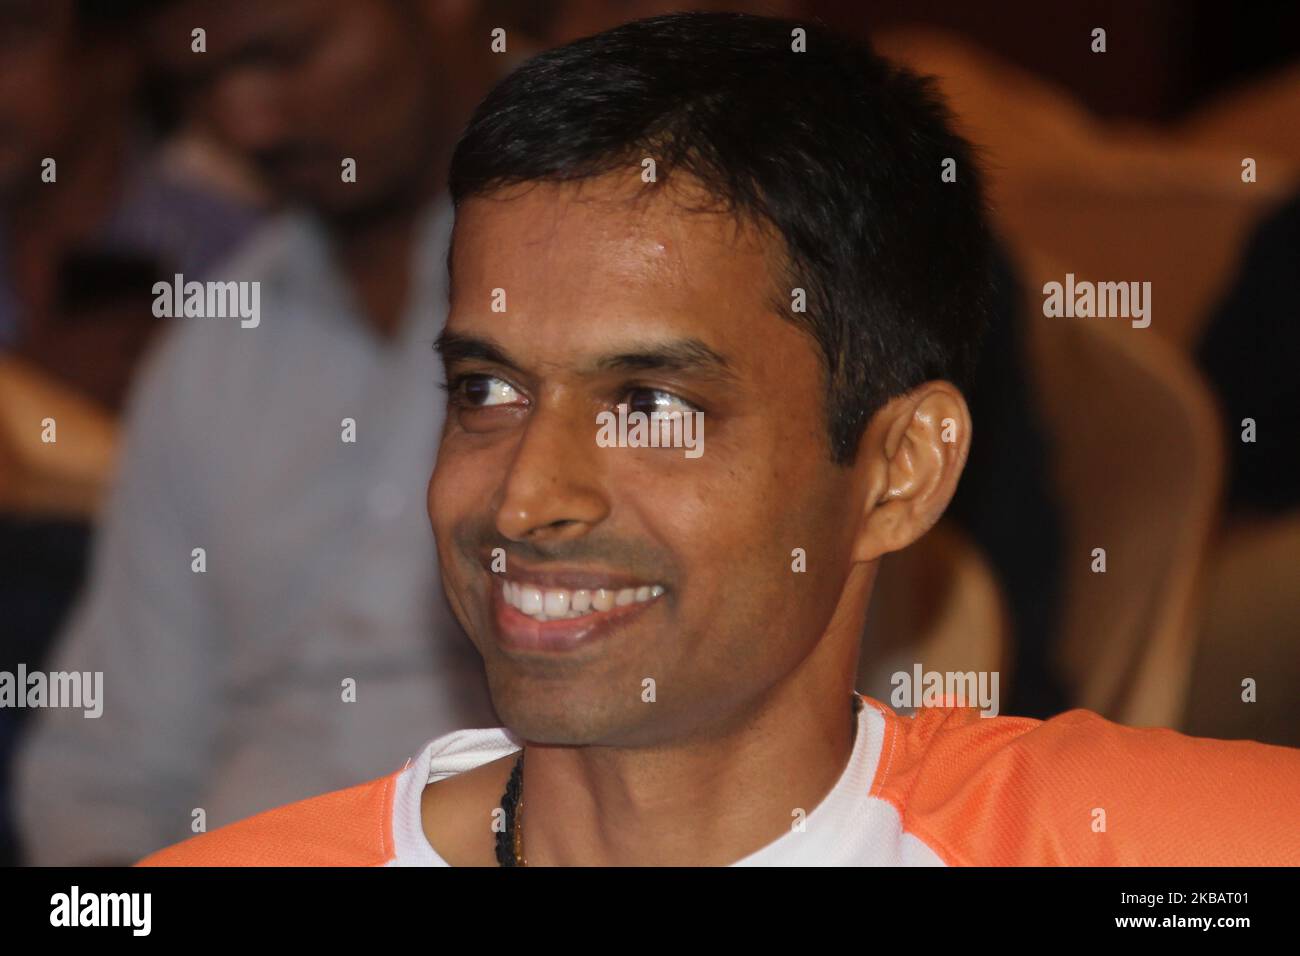 Former Indian badminton player Pullela Gopichand smiles during a launch of an initiative ‘Football Mania’ by IDBI Federal Life Insurance in Mumbai, India on 12 November 2019. The initiative aimed to provide top-quality football coaching to over 10,000 kid in the city. (Photo by Himanshu Bhatt/NurPhoto) Stock Photo